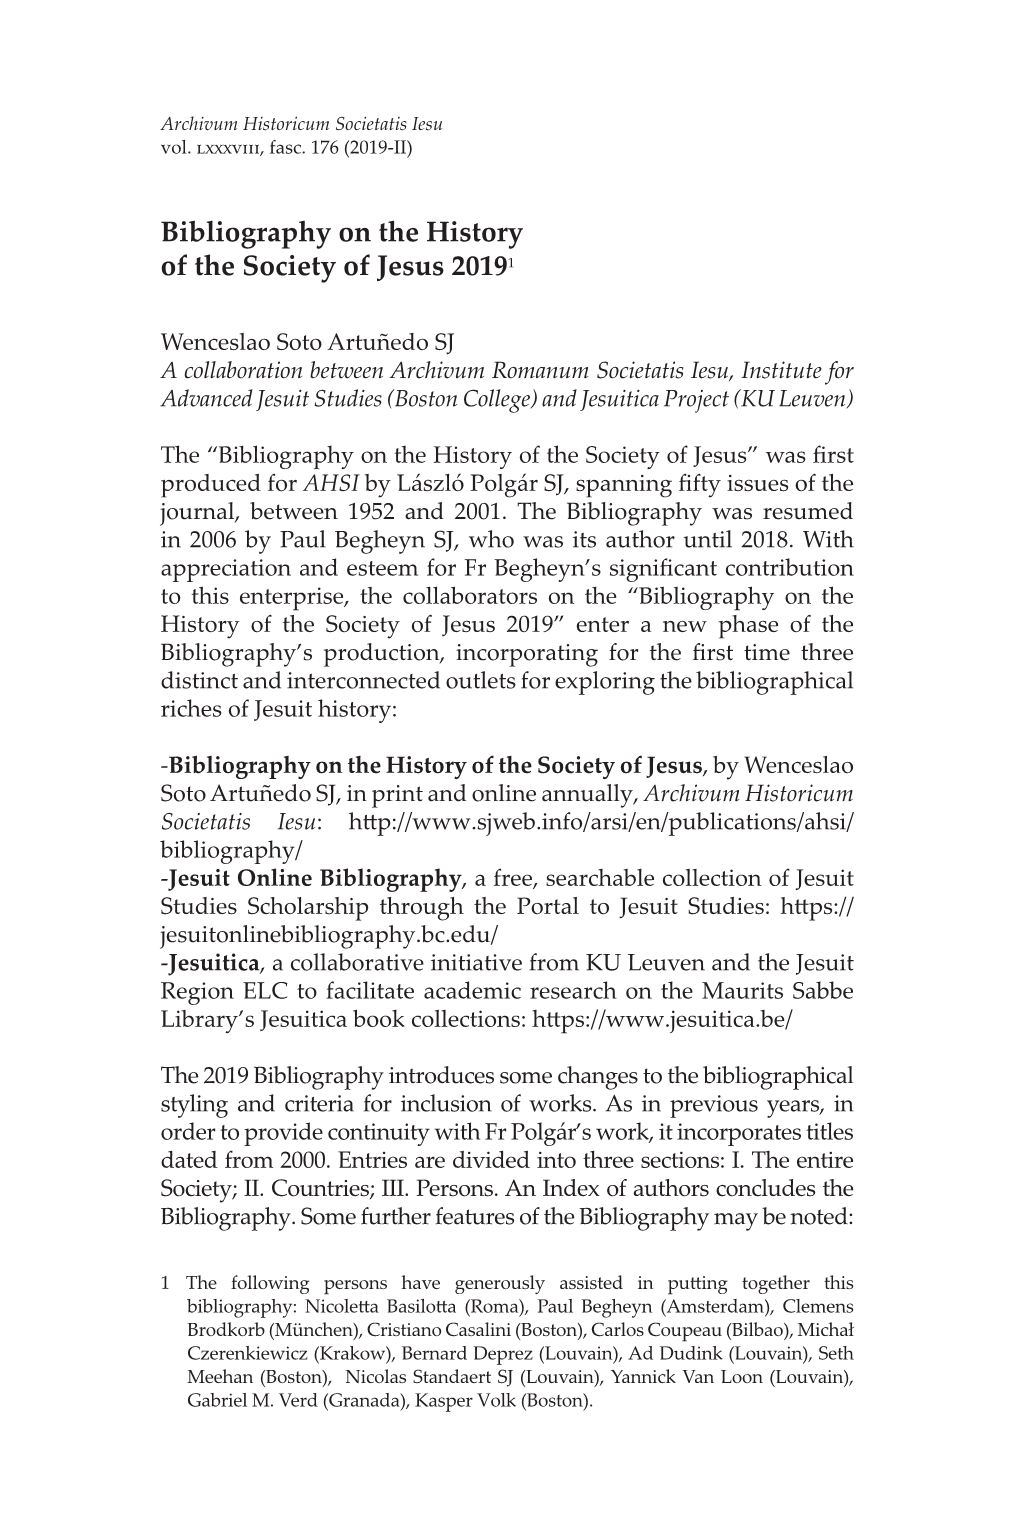 Bibliography on the History of the Society of Jesus 20191